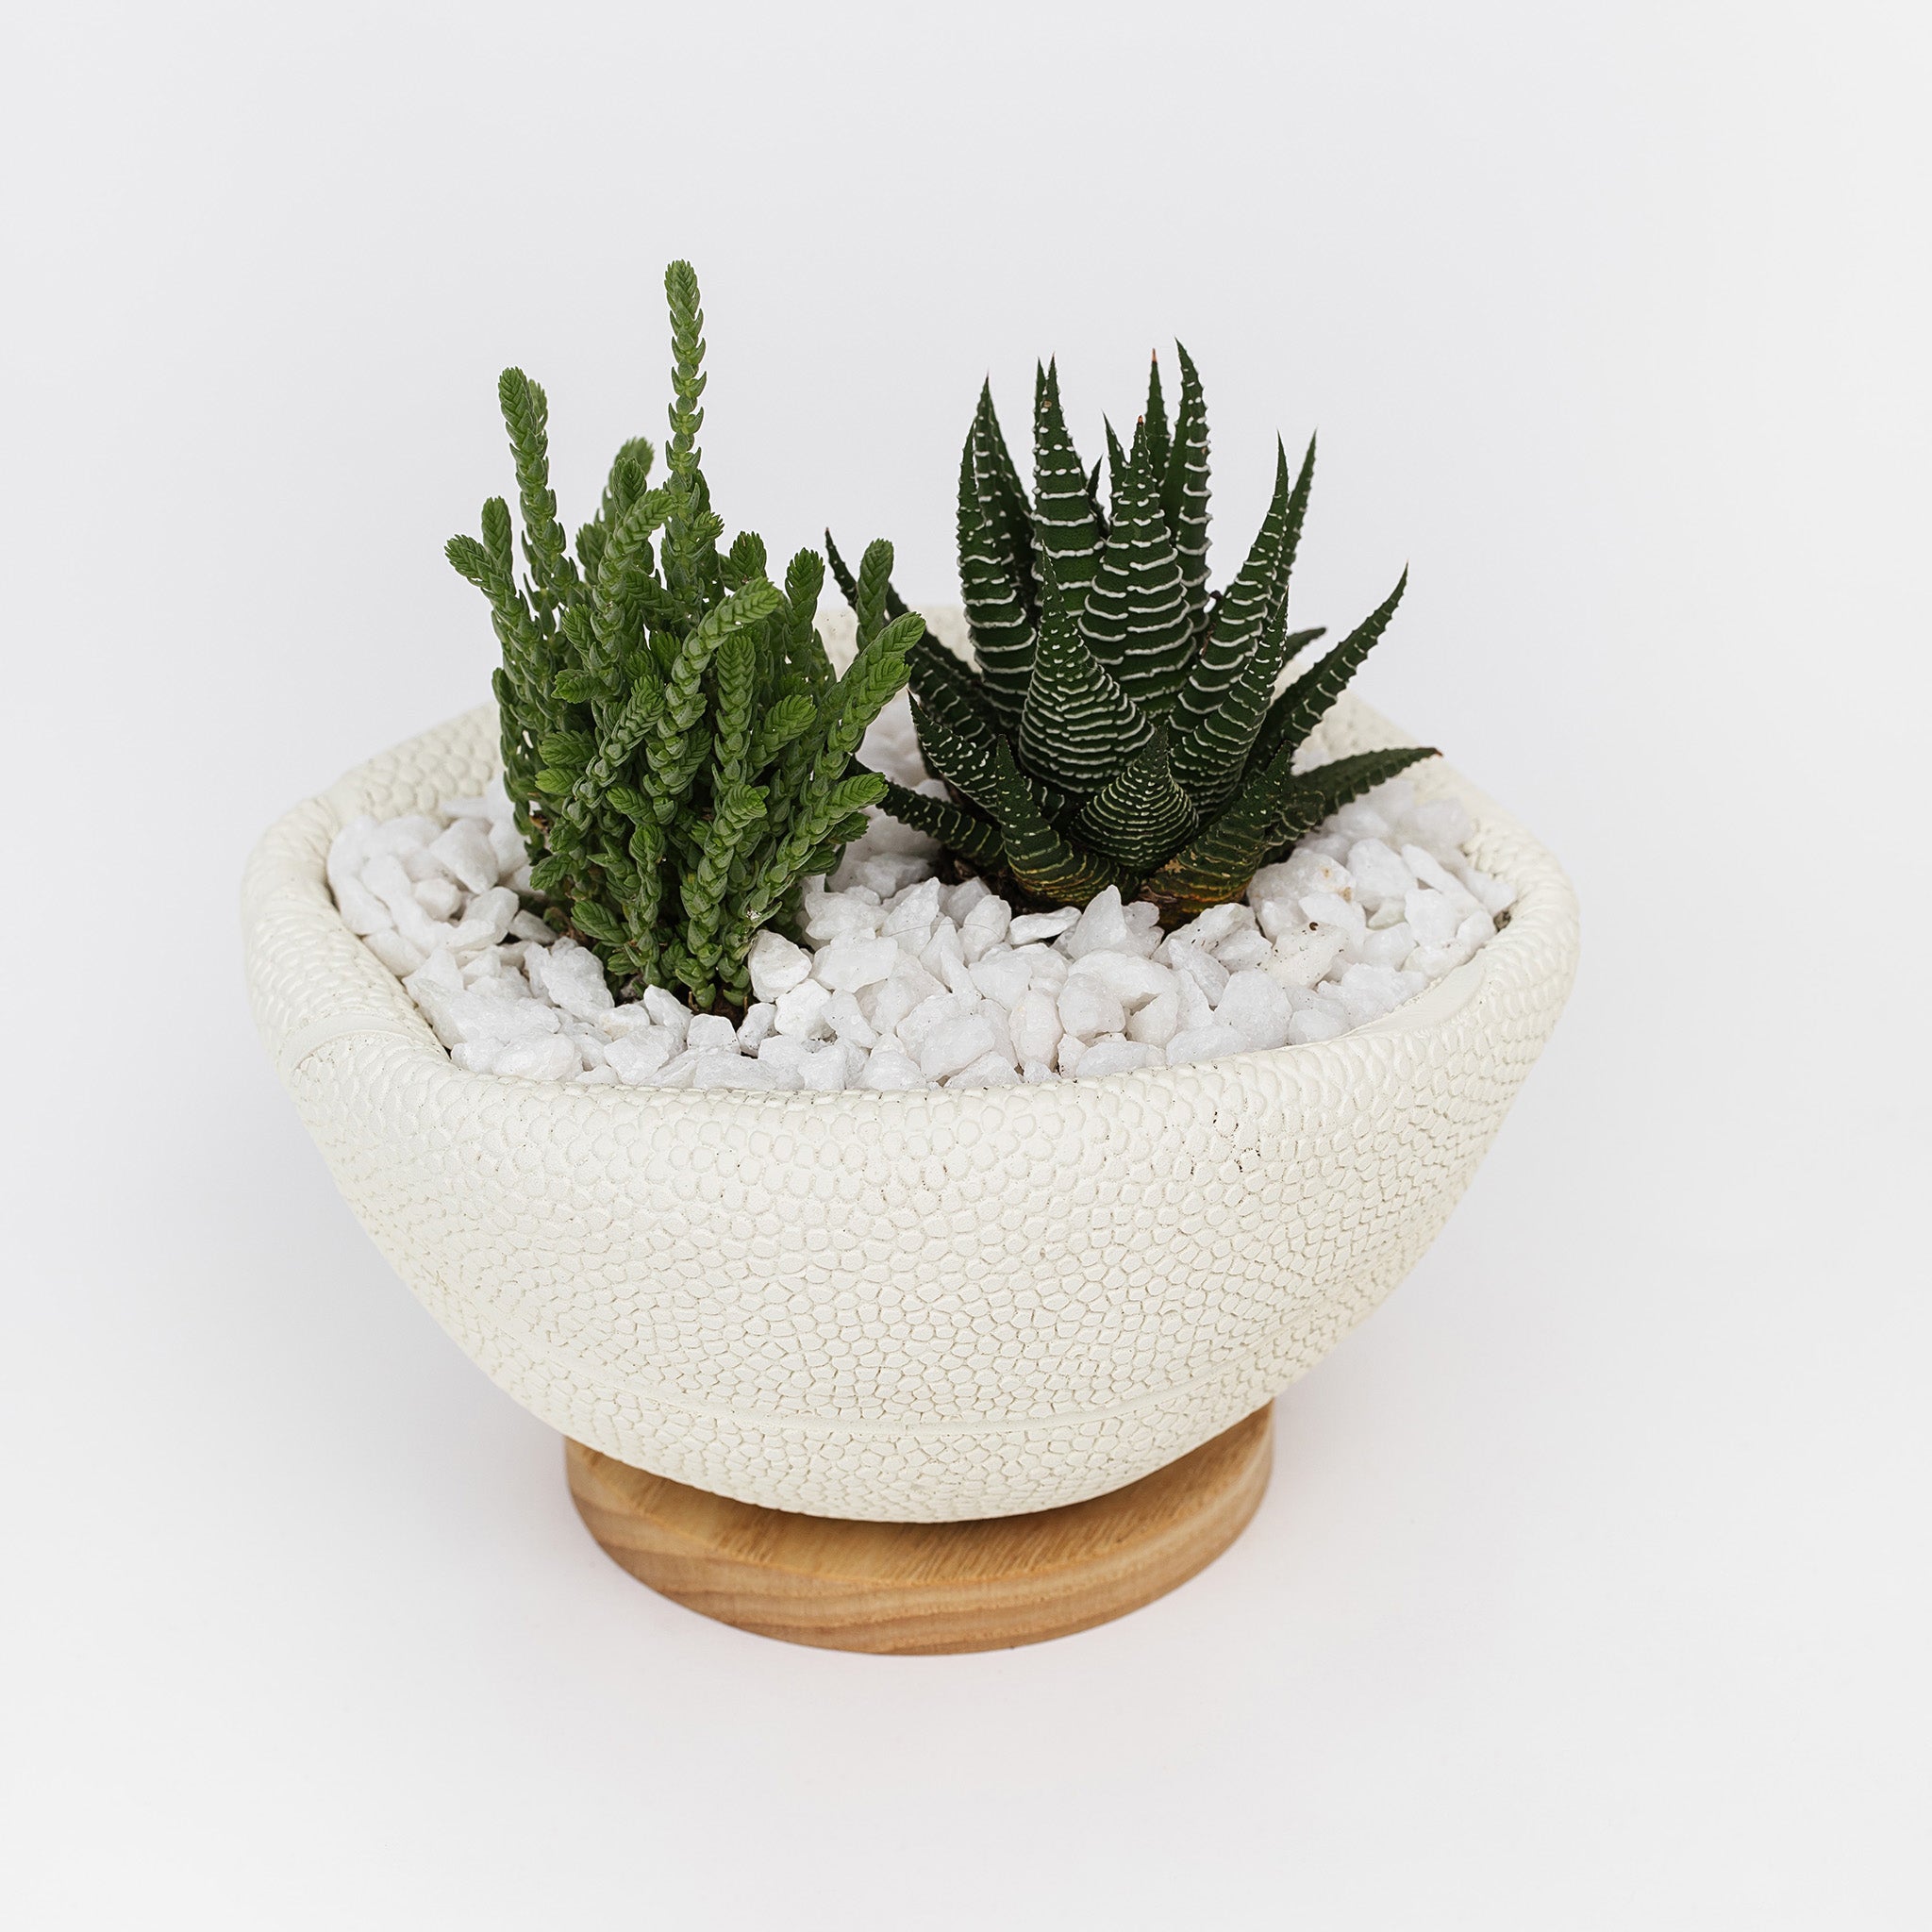 Mini basketball bowl planted with succulents 